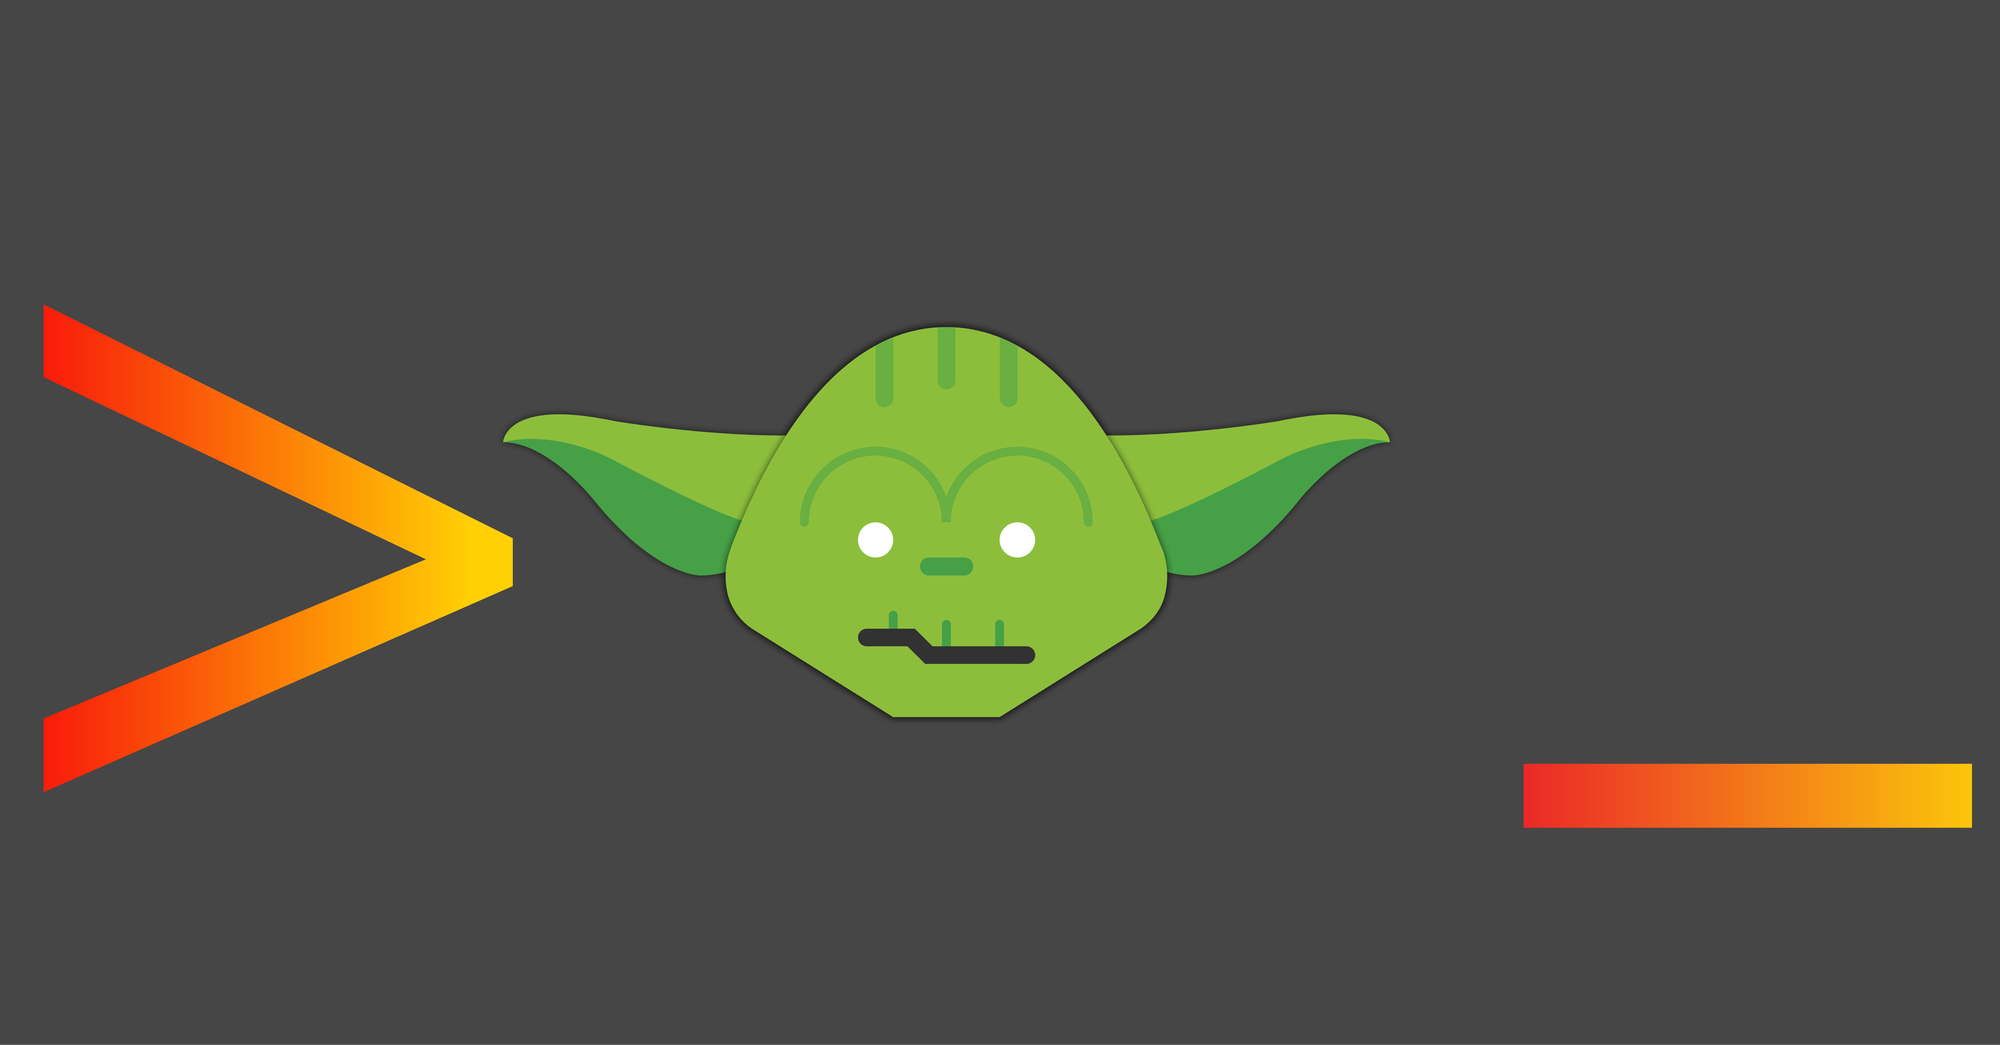 GitHub - yoda-pa/yoda: Wise and powerful personal assistant, available in your nearest terminal